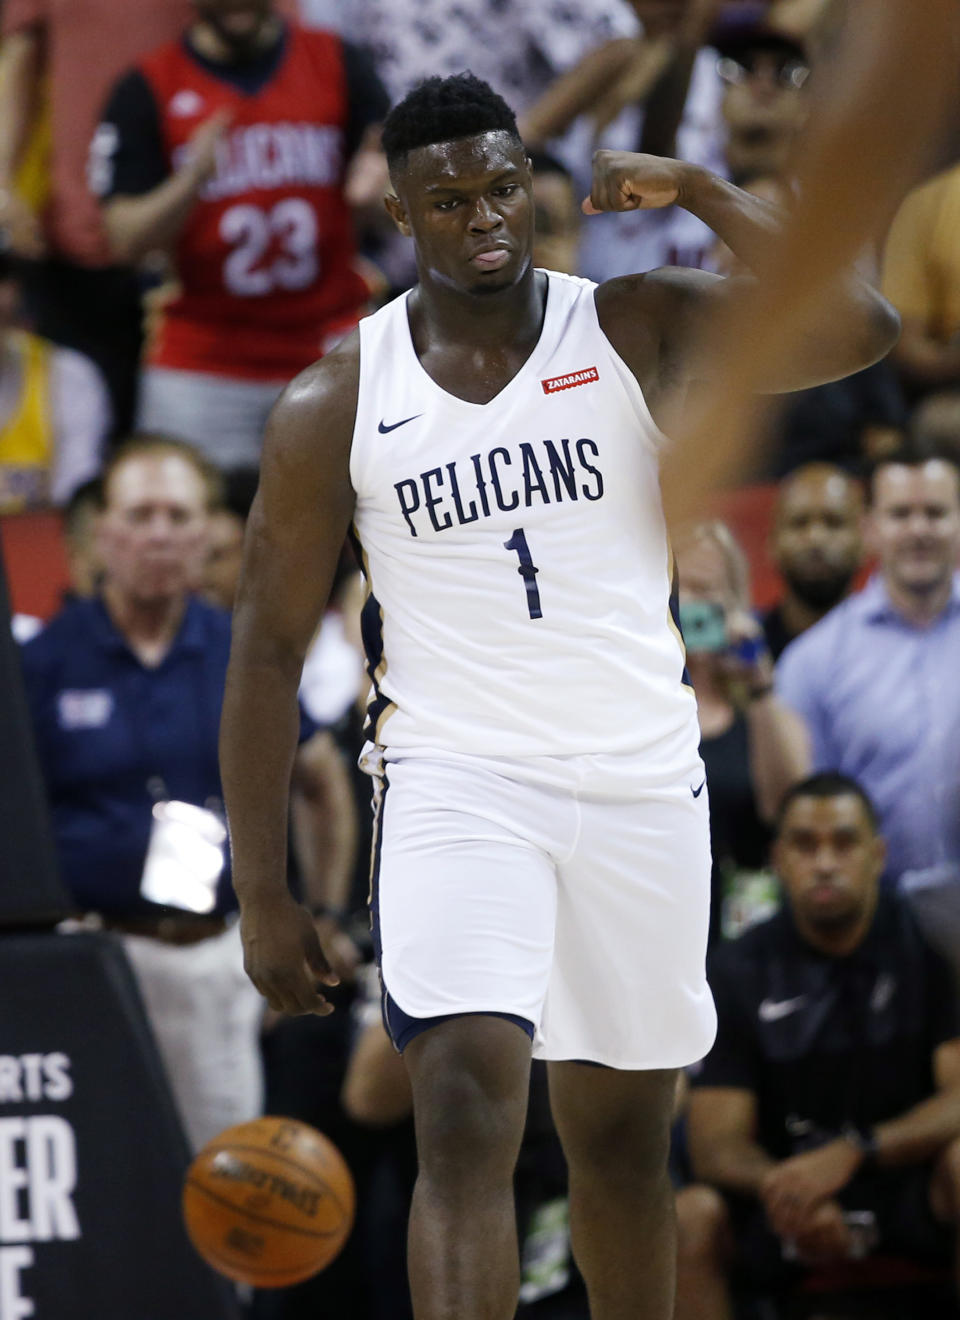 New Orleans Pelicans' Zion Williamson (1) reacts during the team's NBA summer league basketball game against the New York Knicks on Friday, July 5, 2019, in Las Vegas. (AP Photo/Steve Marcus)